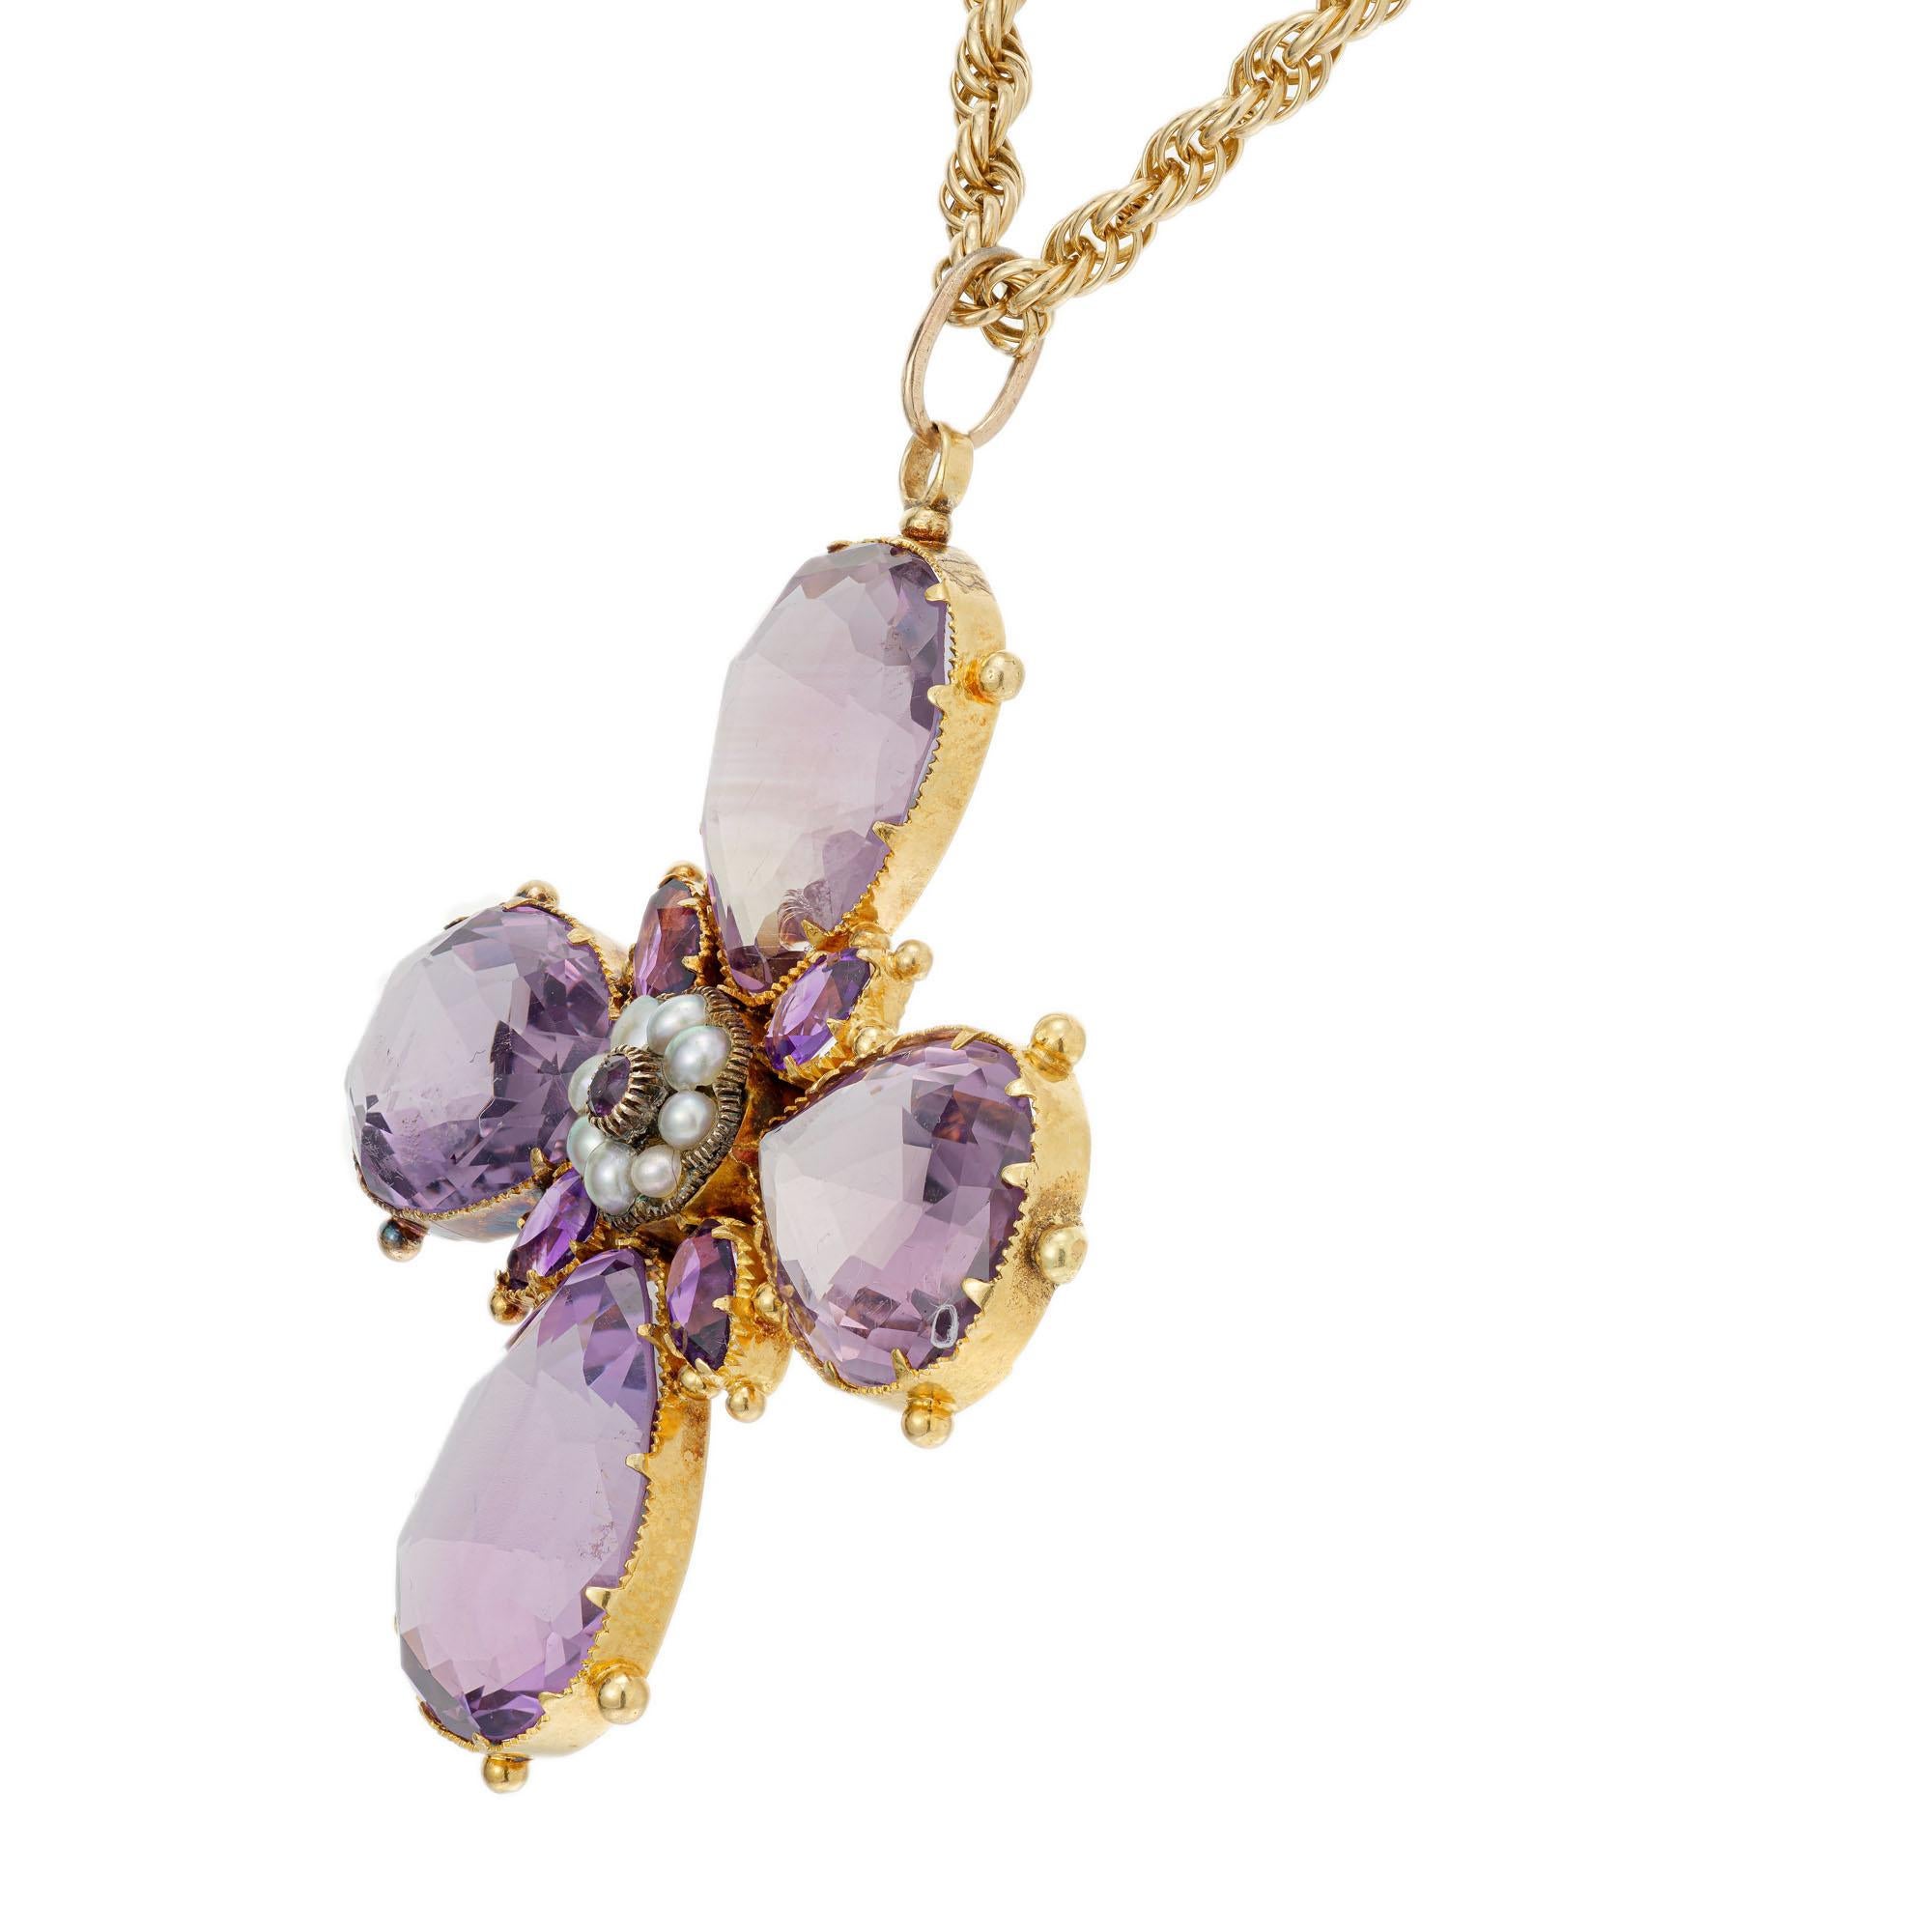 Amethyst and pearl Victorian 1890's cross shape pendant necklace. Natural amethyst and natural pearls in handmade 18k yellow gold with natural patina setting with 32 inch chain.  The back has a 7.5mm round center section with a crystal cover to